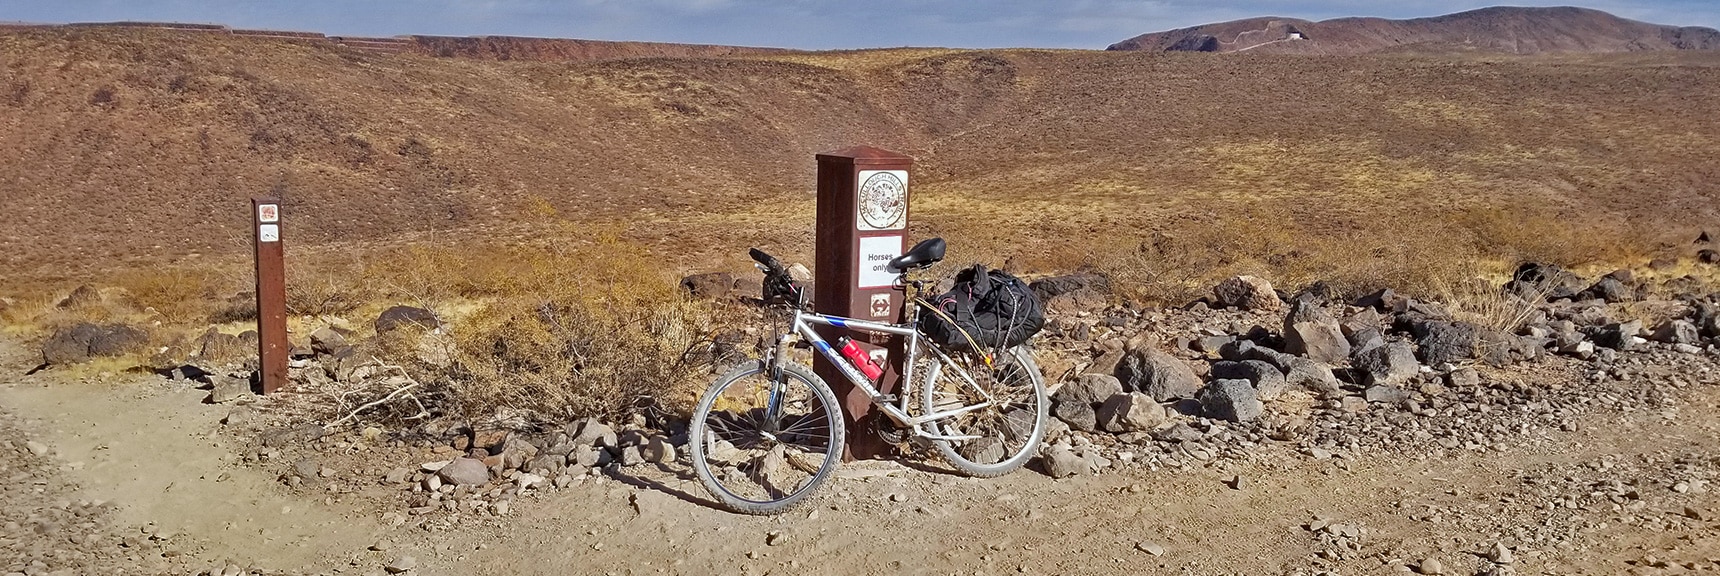 Horse Trail Crossing on the McCullough Hills Trail | McCullough Hills Trail in Sloan Canyon National Conservation Area, Nevada